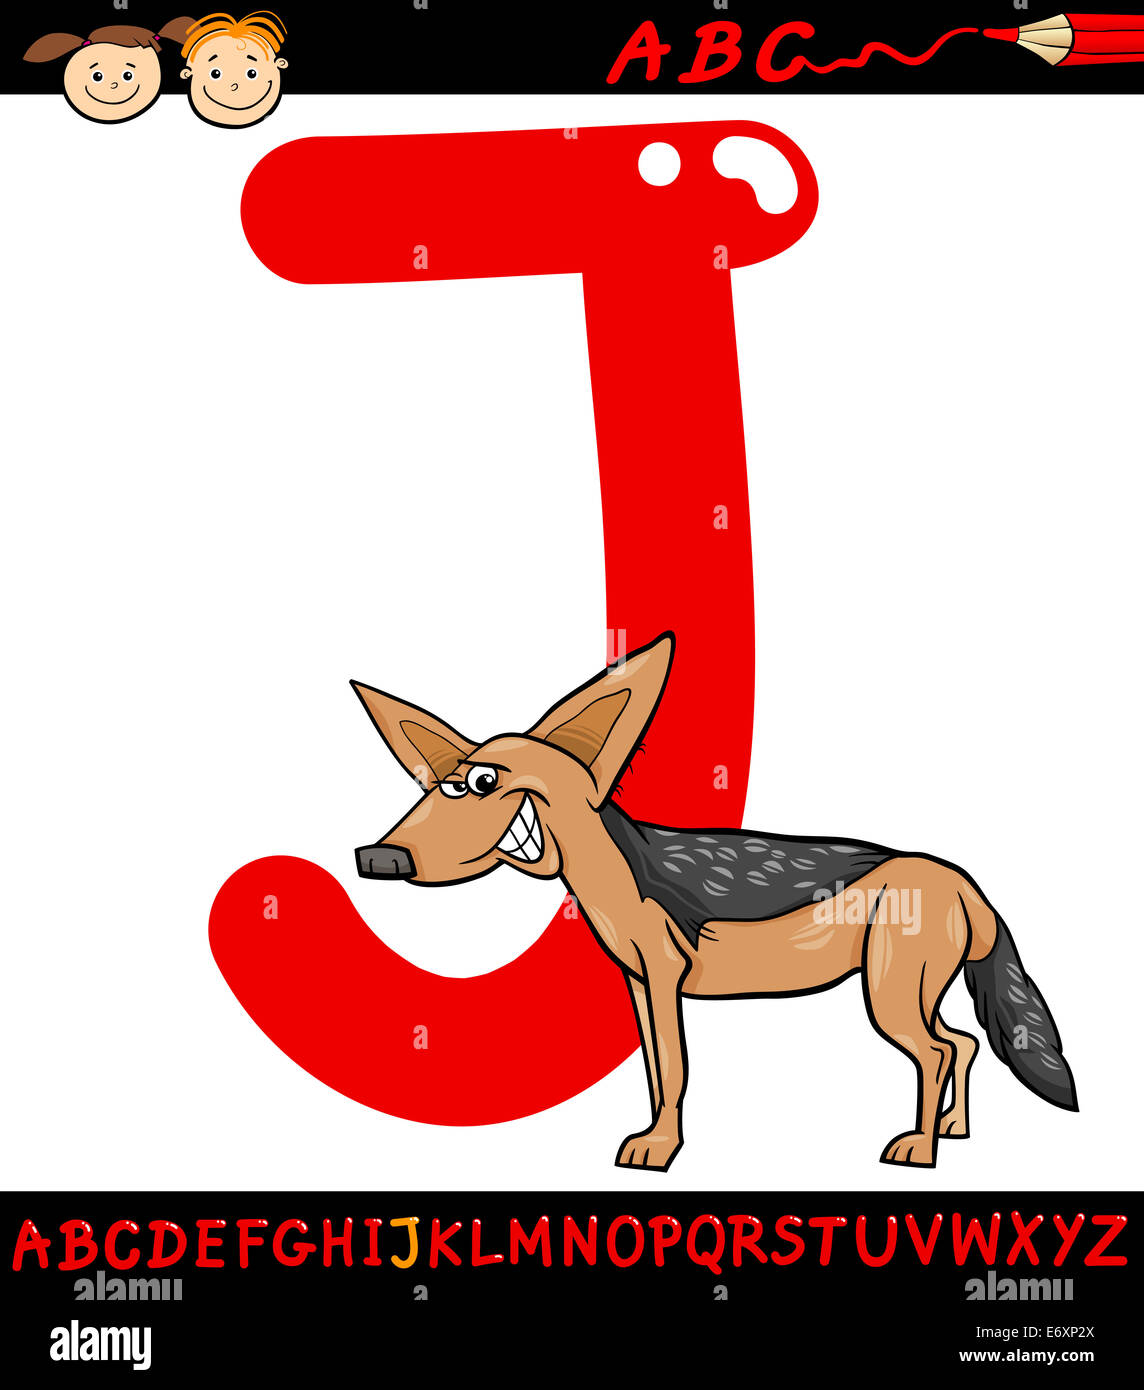 Cartoon Illustration of Capital Letter J from Alphabet with Jackal Animal for Children Education Stock Photo